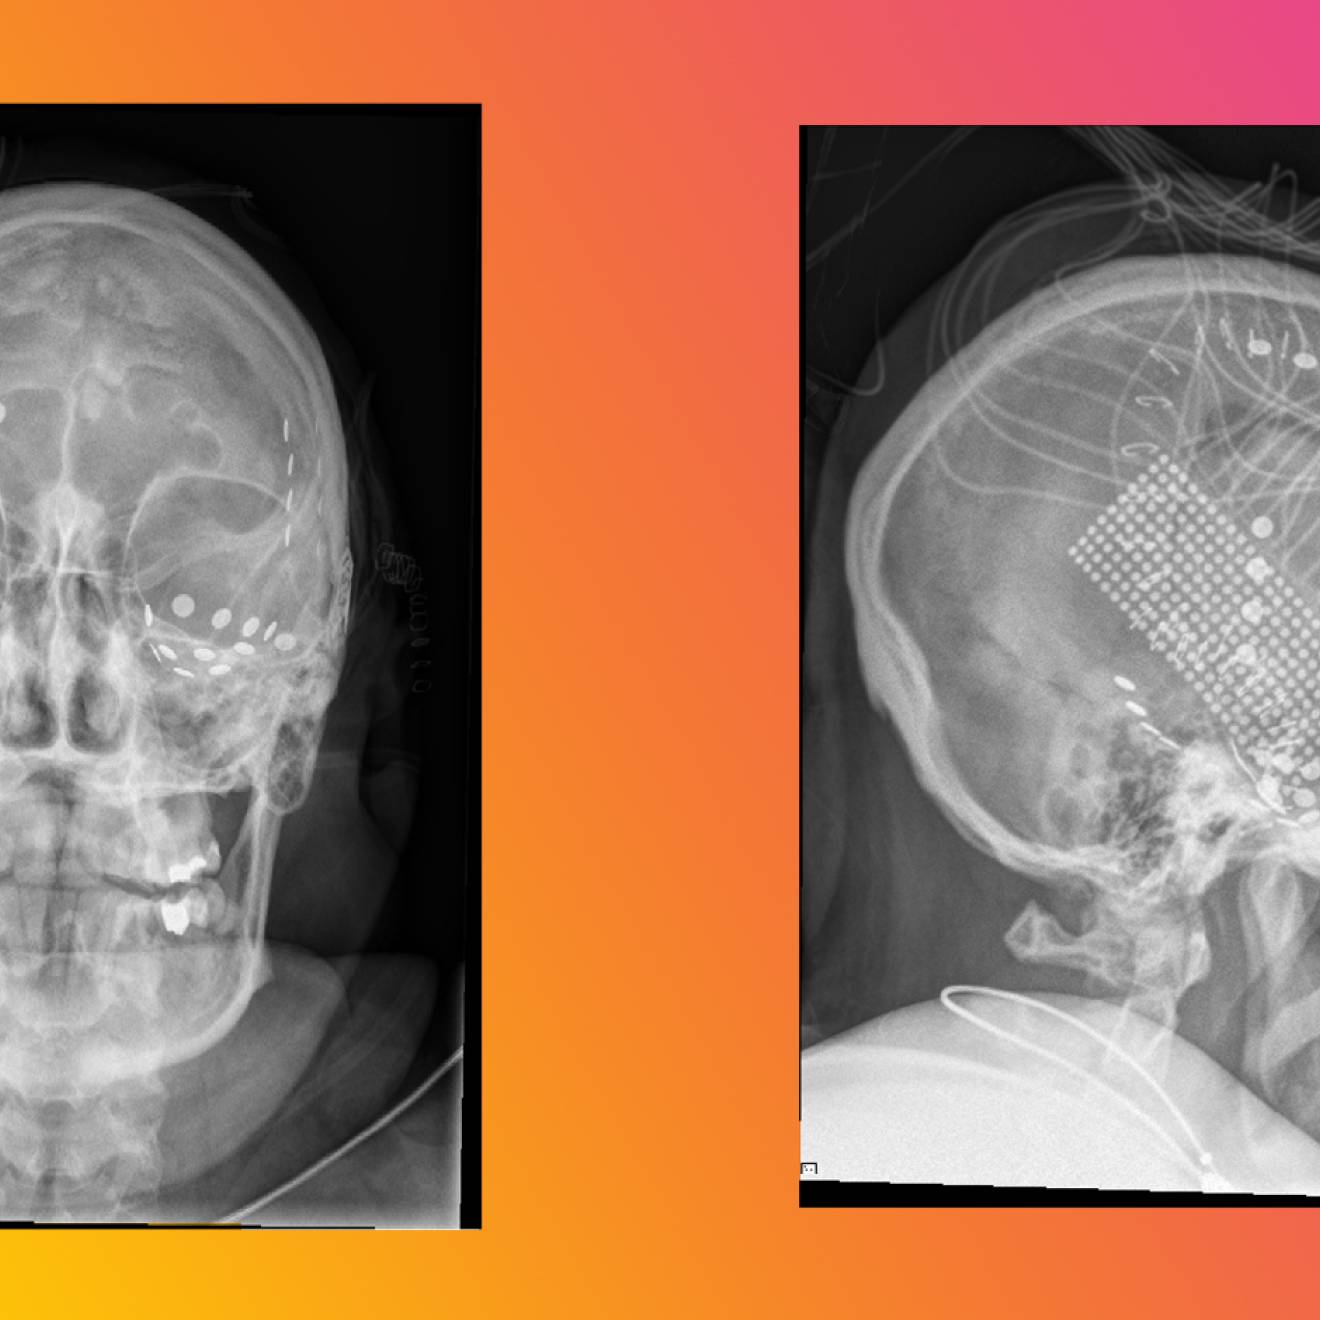 Head X-rays of subjects in the experiment